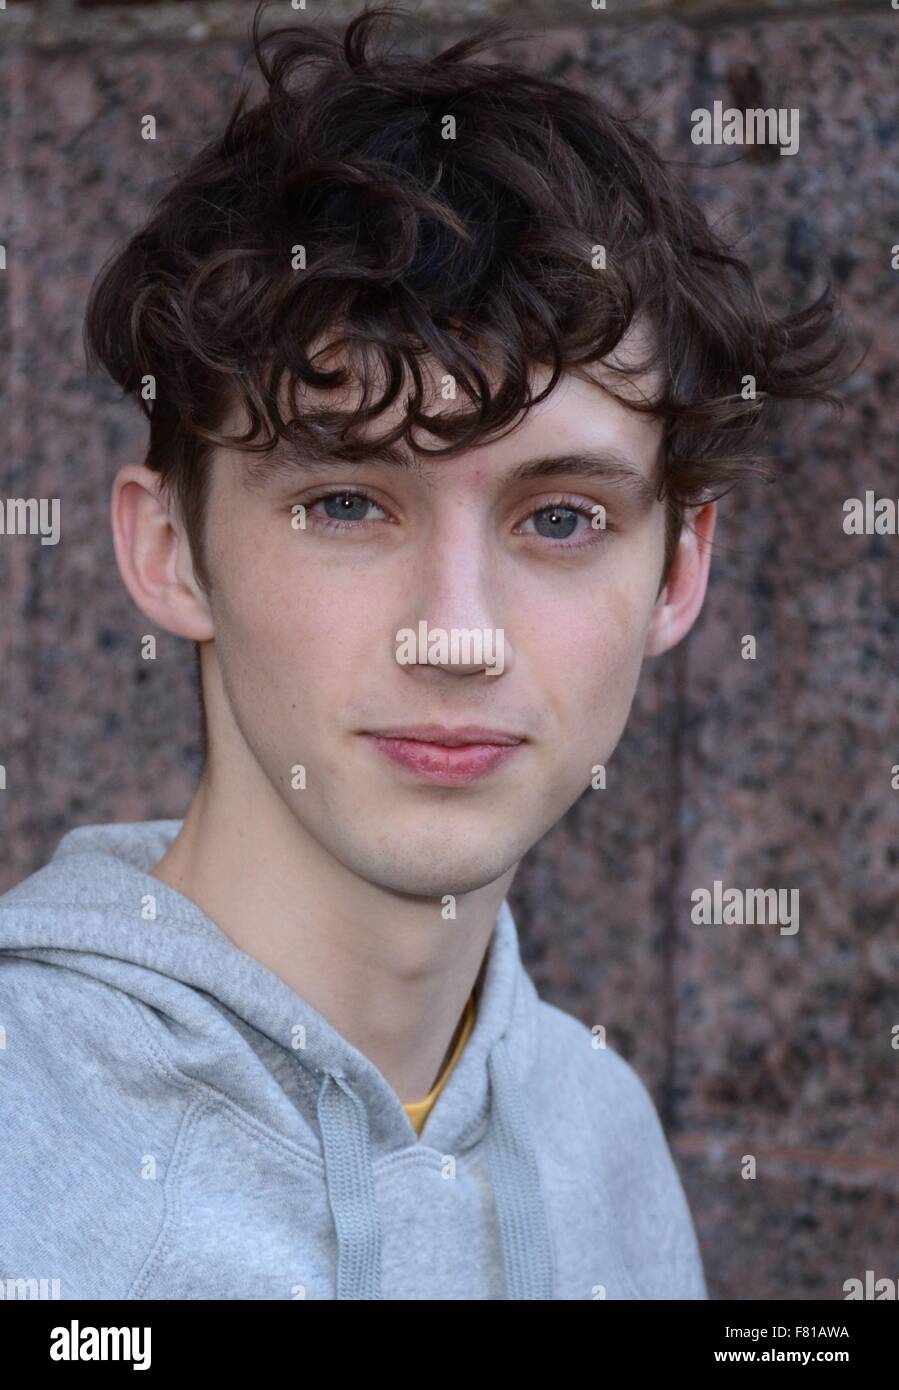 Troye Sivan Updates X:ssä: 📸 Troye at Louis Vuitton SEE LV Exhibition  Opening's! © gettyimages  / X